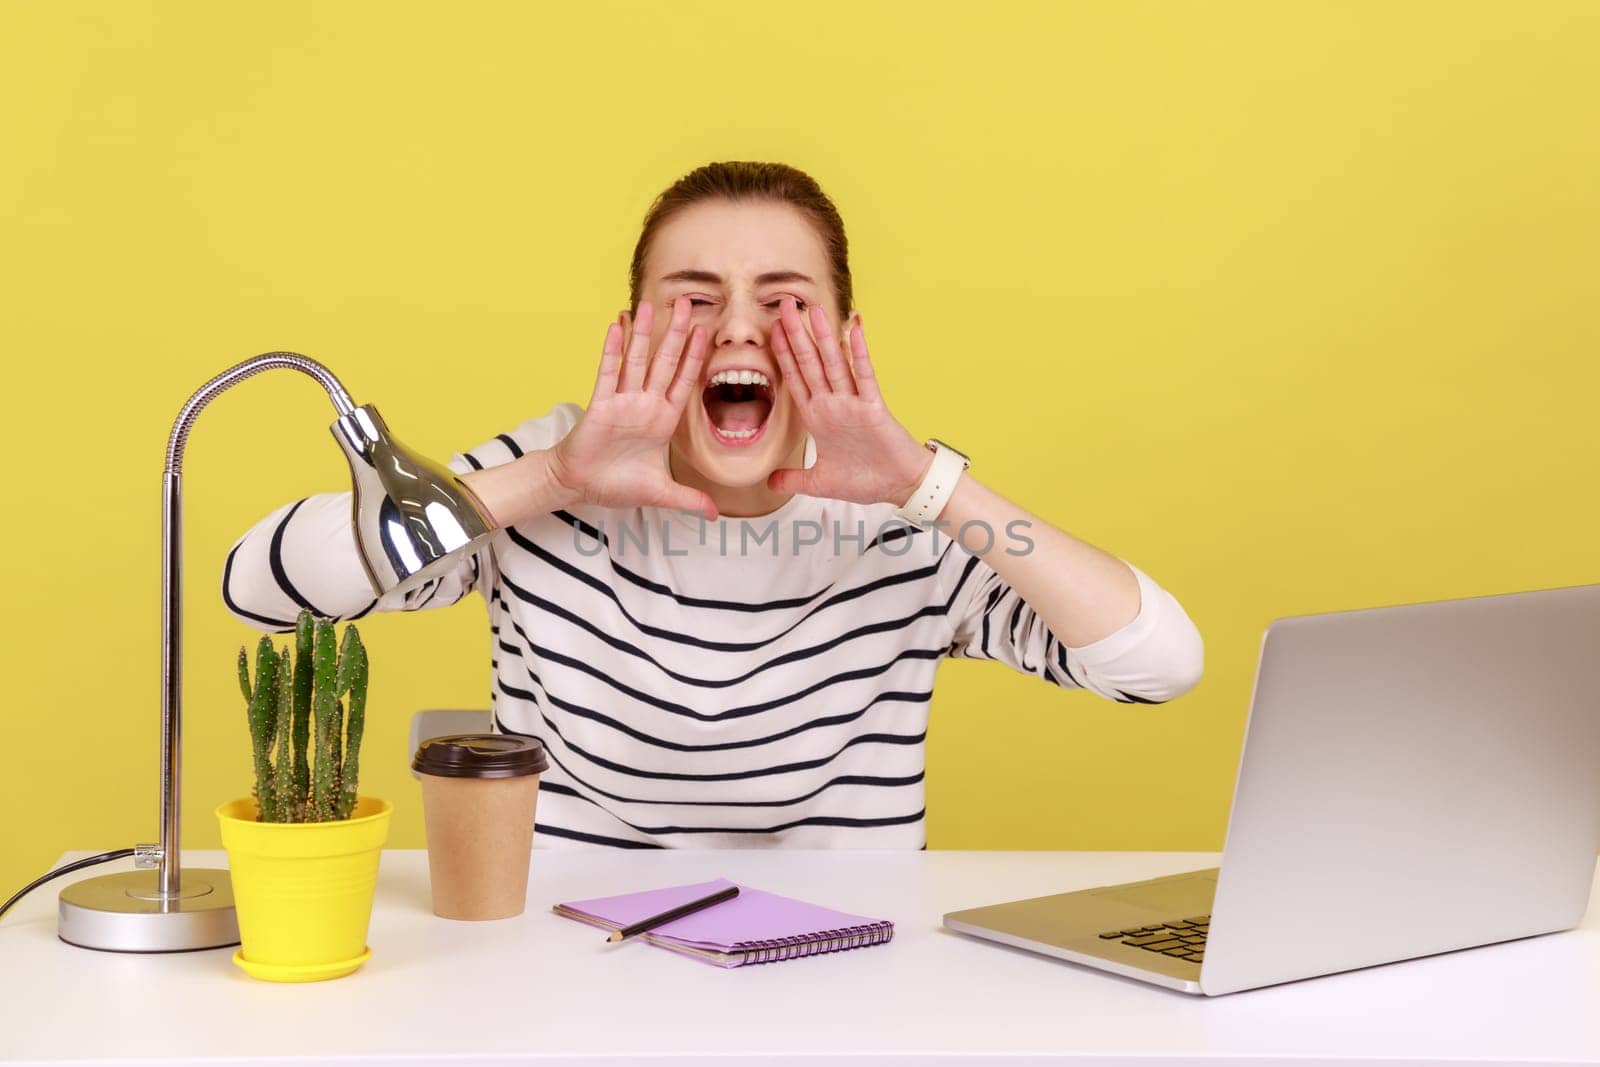 Nervous angry woman office worker in striped shirt loudly screaming holding hands near mouth, looking at camera, sitting at workplace. Indoor studio studio shot isolated on yellow background.